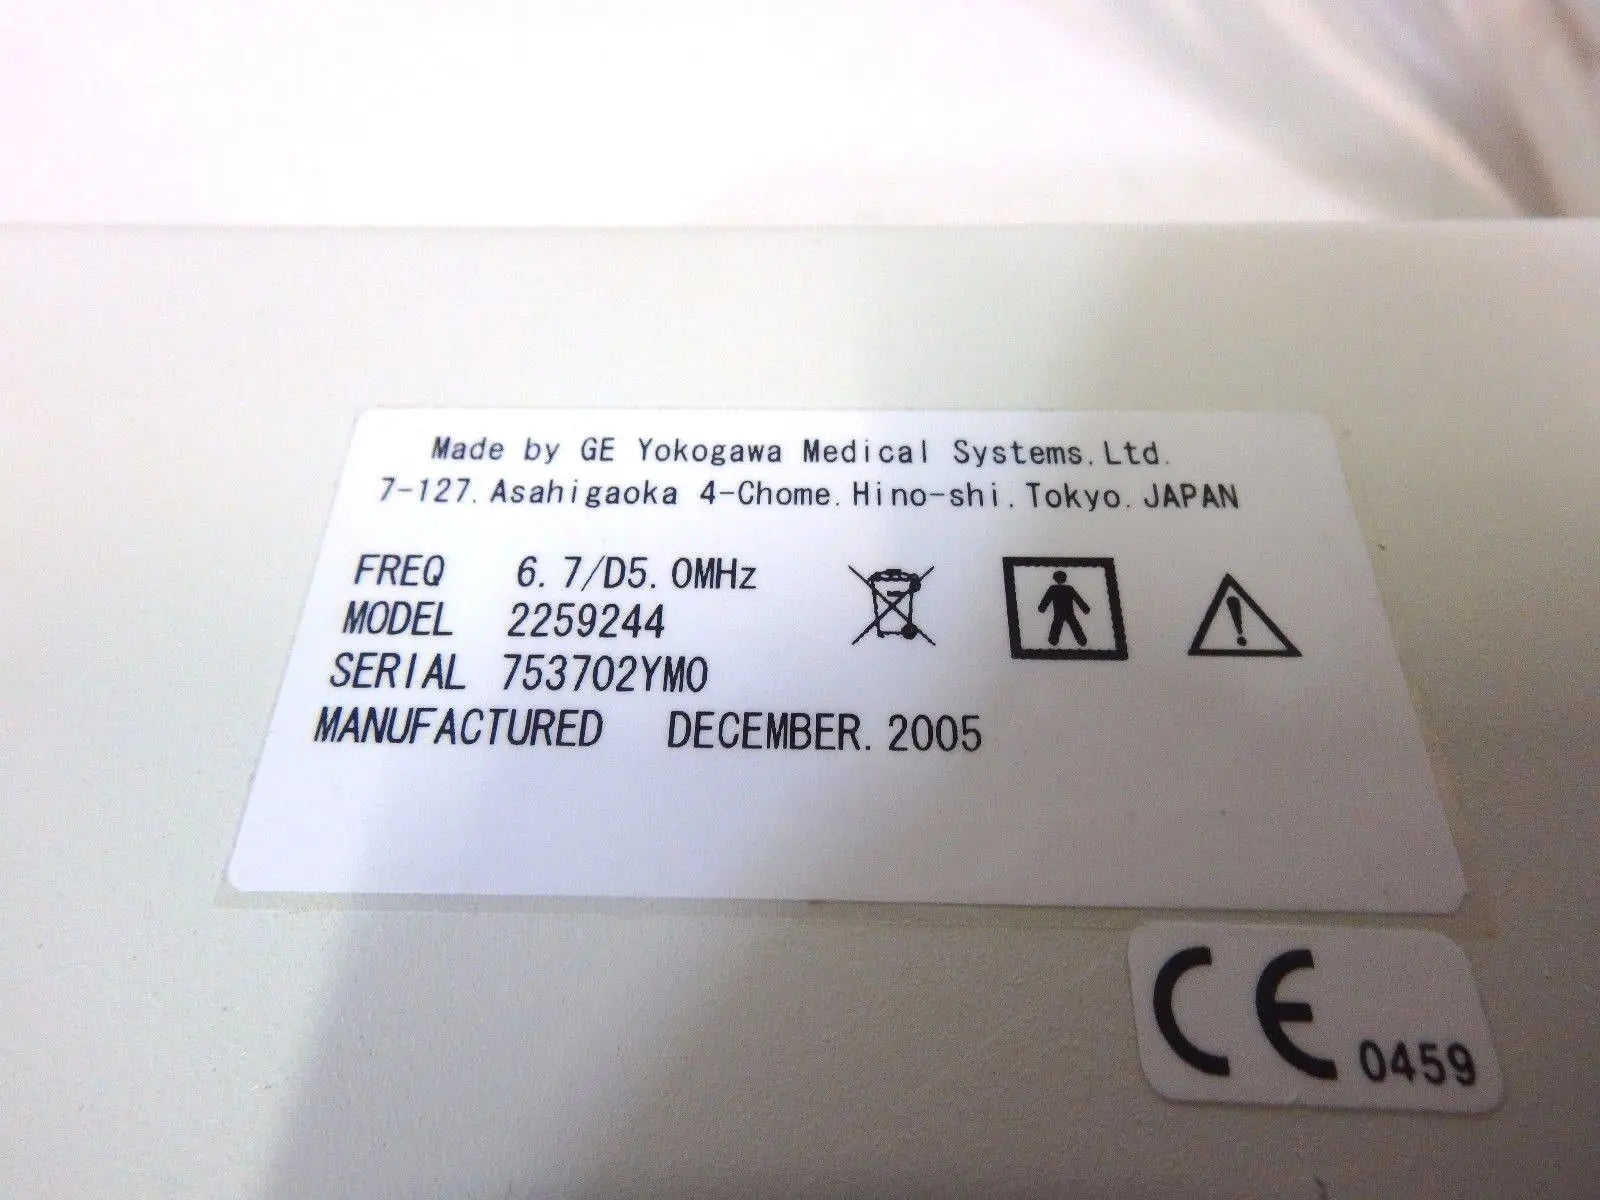 GE T739 Intraoperative 6.7/D5 0MHz Ultrasound Transducer Probe 2259244 Medical